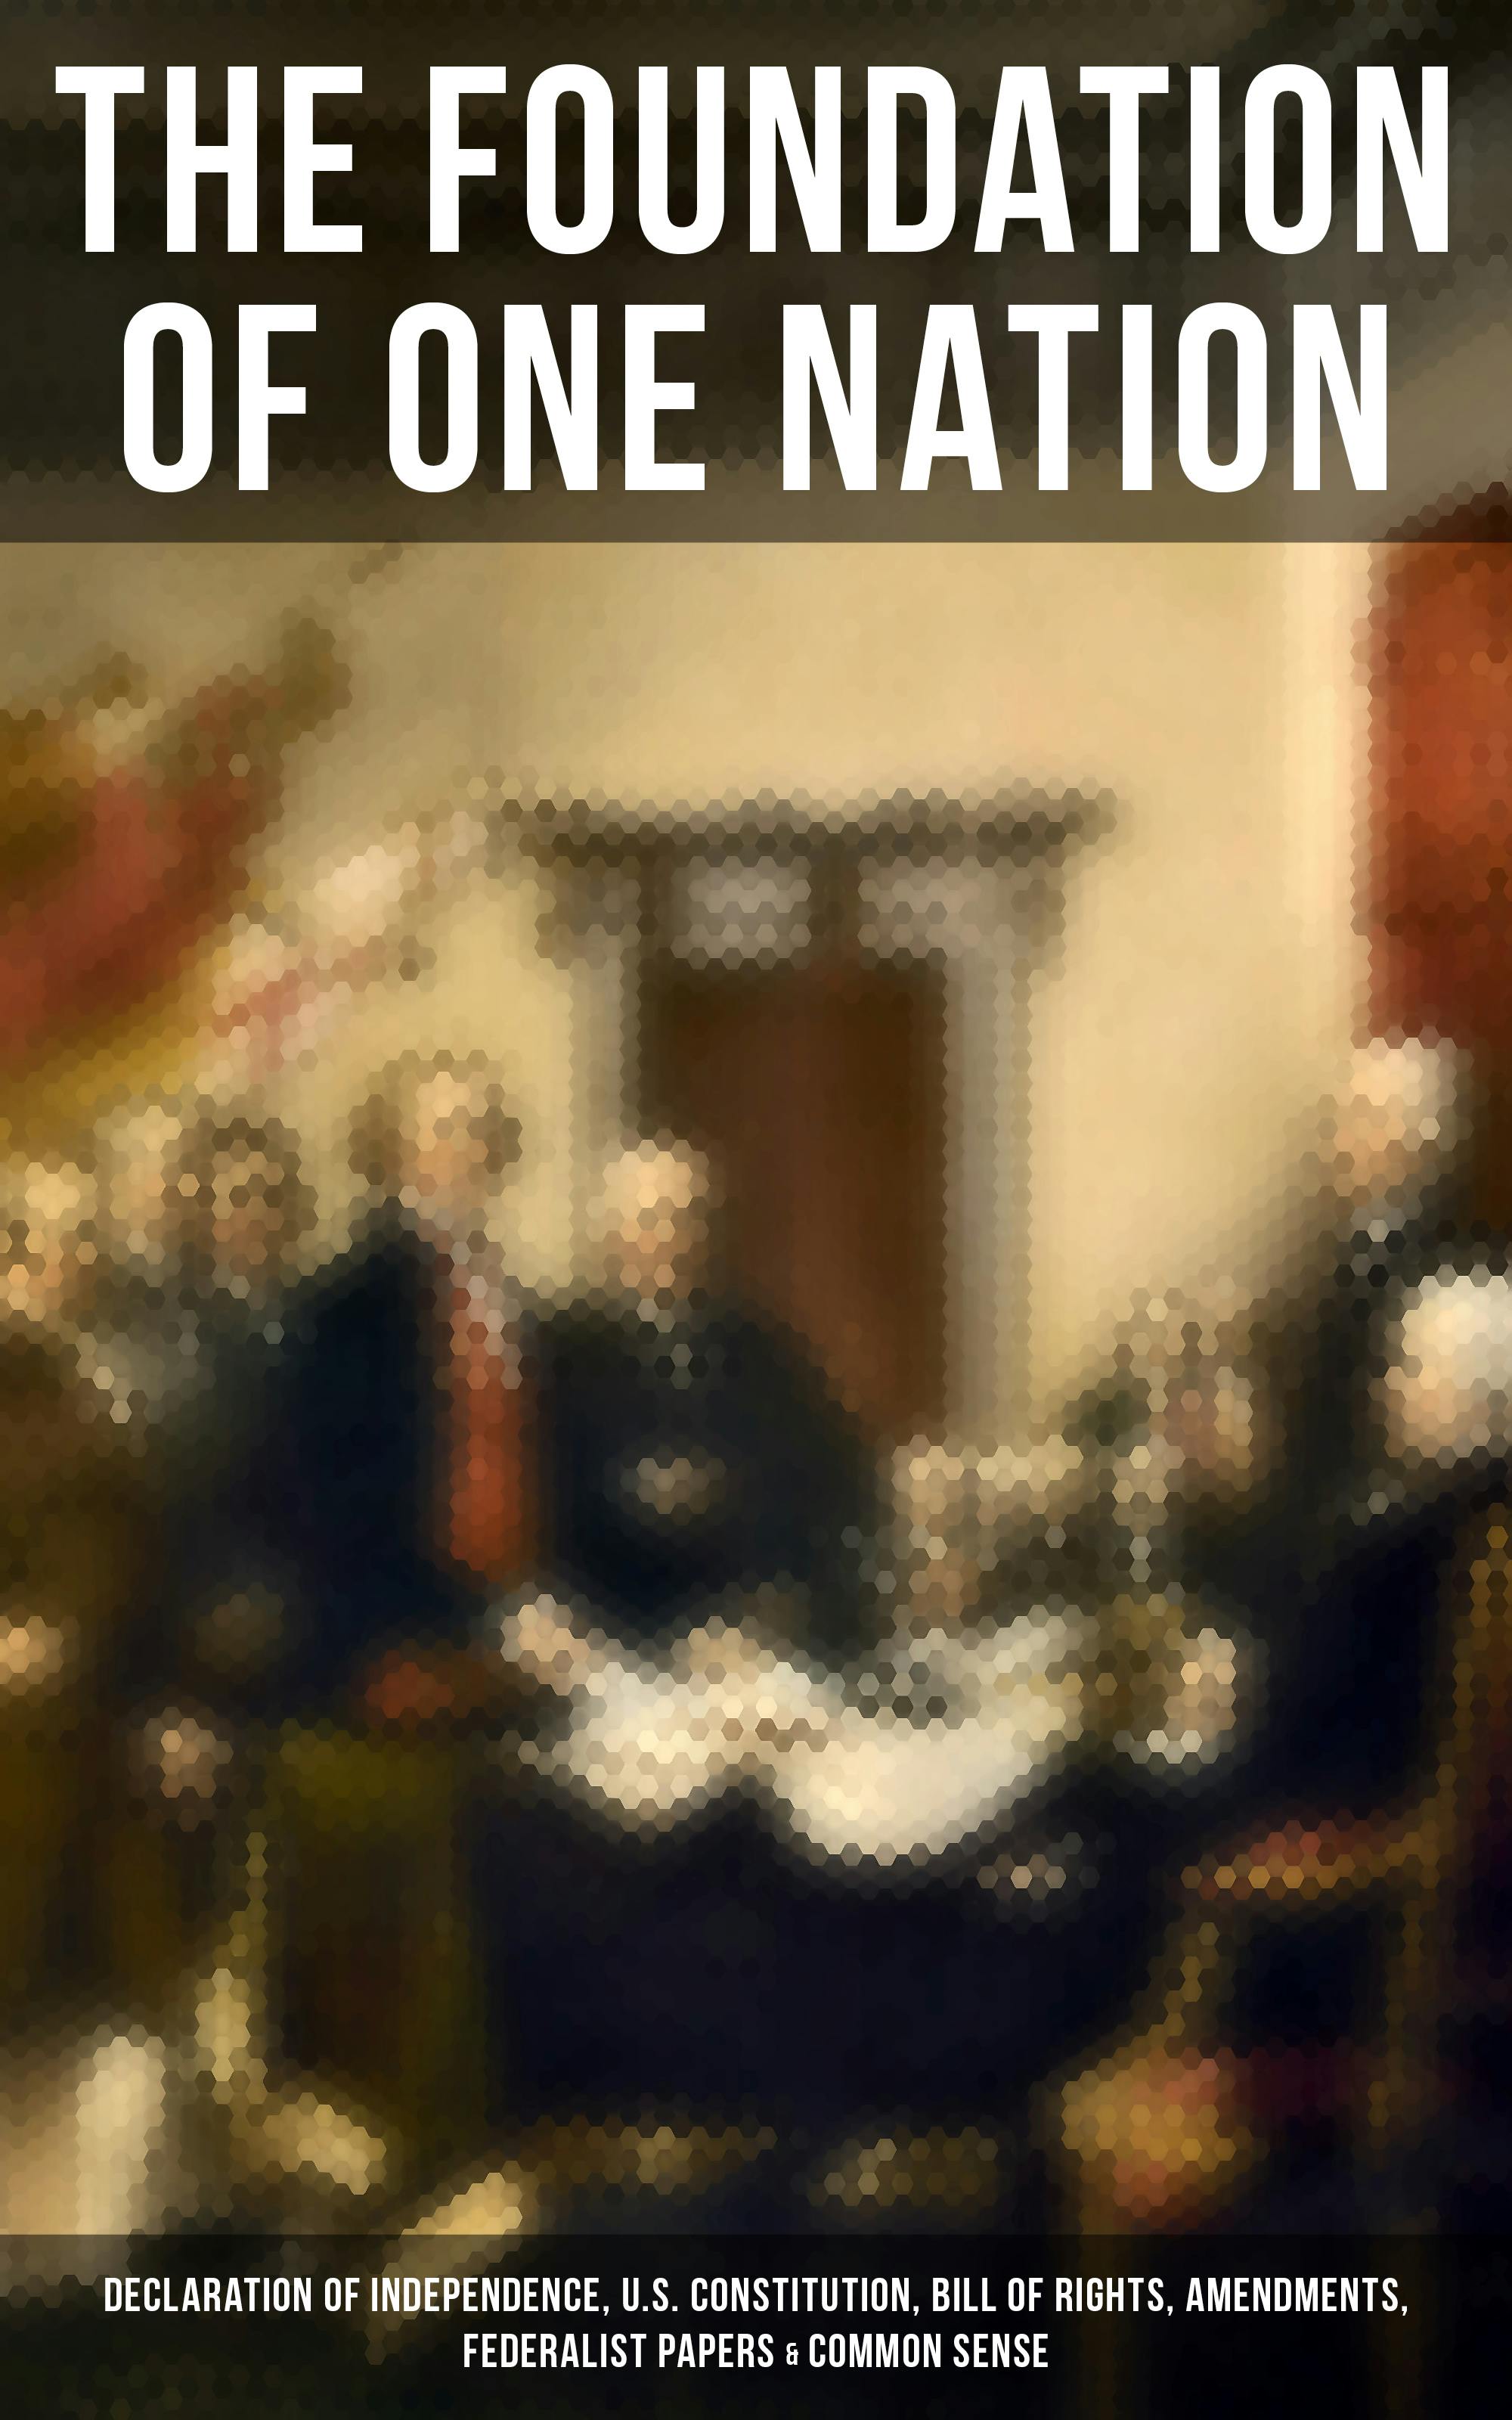 The Foundation of one Nation: Declaration of Independence, U.S. Constitution, Bill of Rights, Amendments, Federalist Papers & Common Sense - James Madison, Alexander Hamilton, John Jay, Thomas Paine